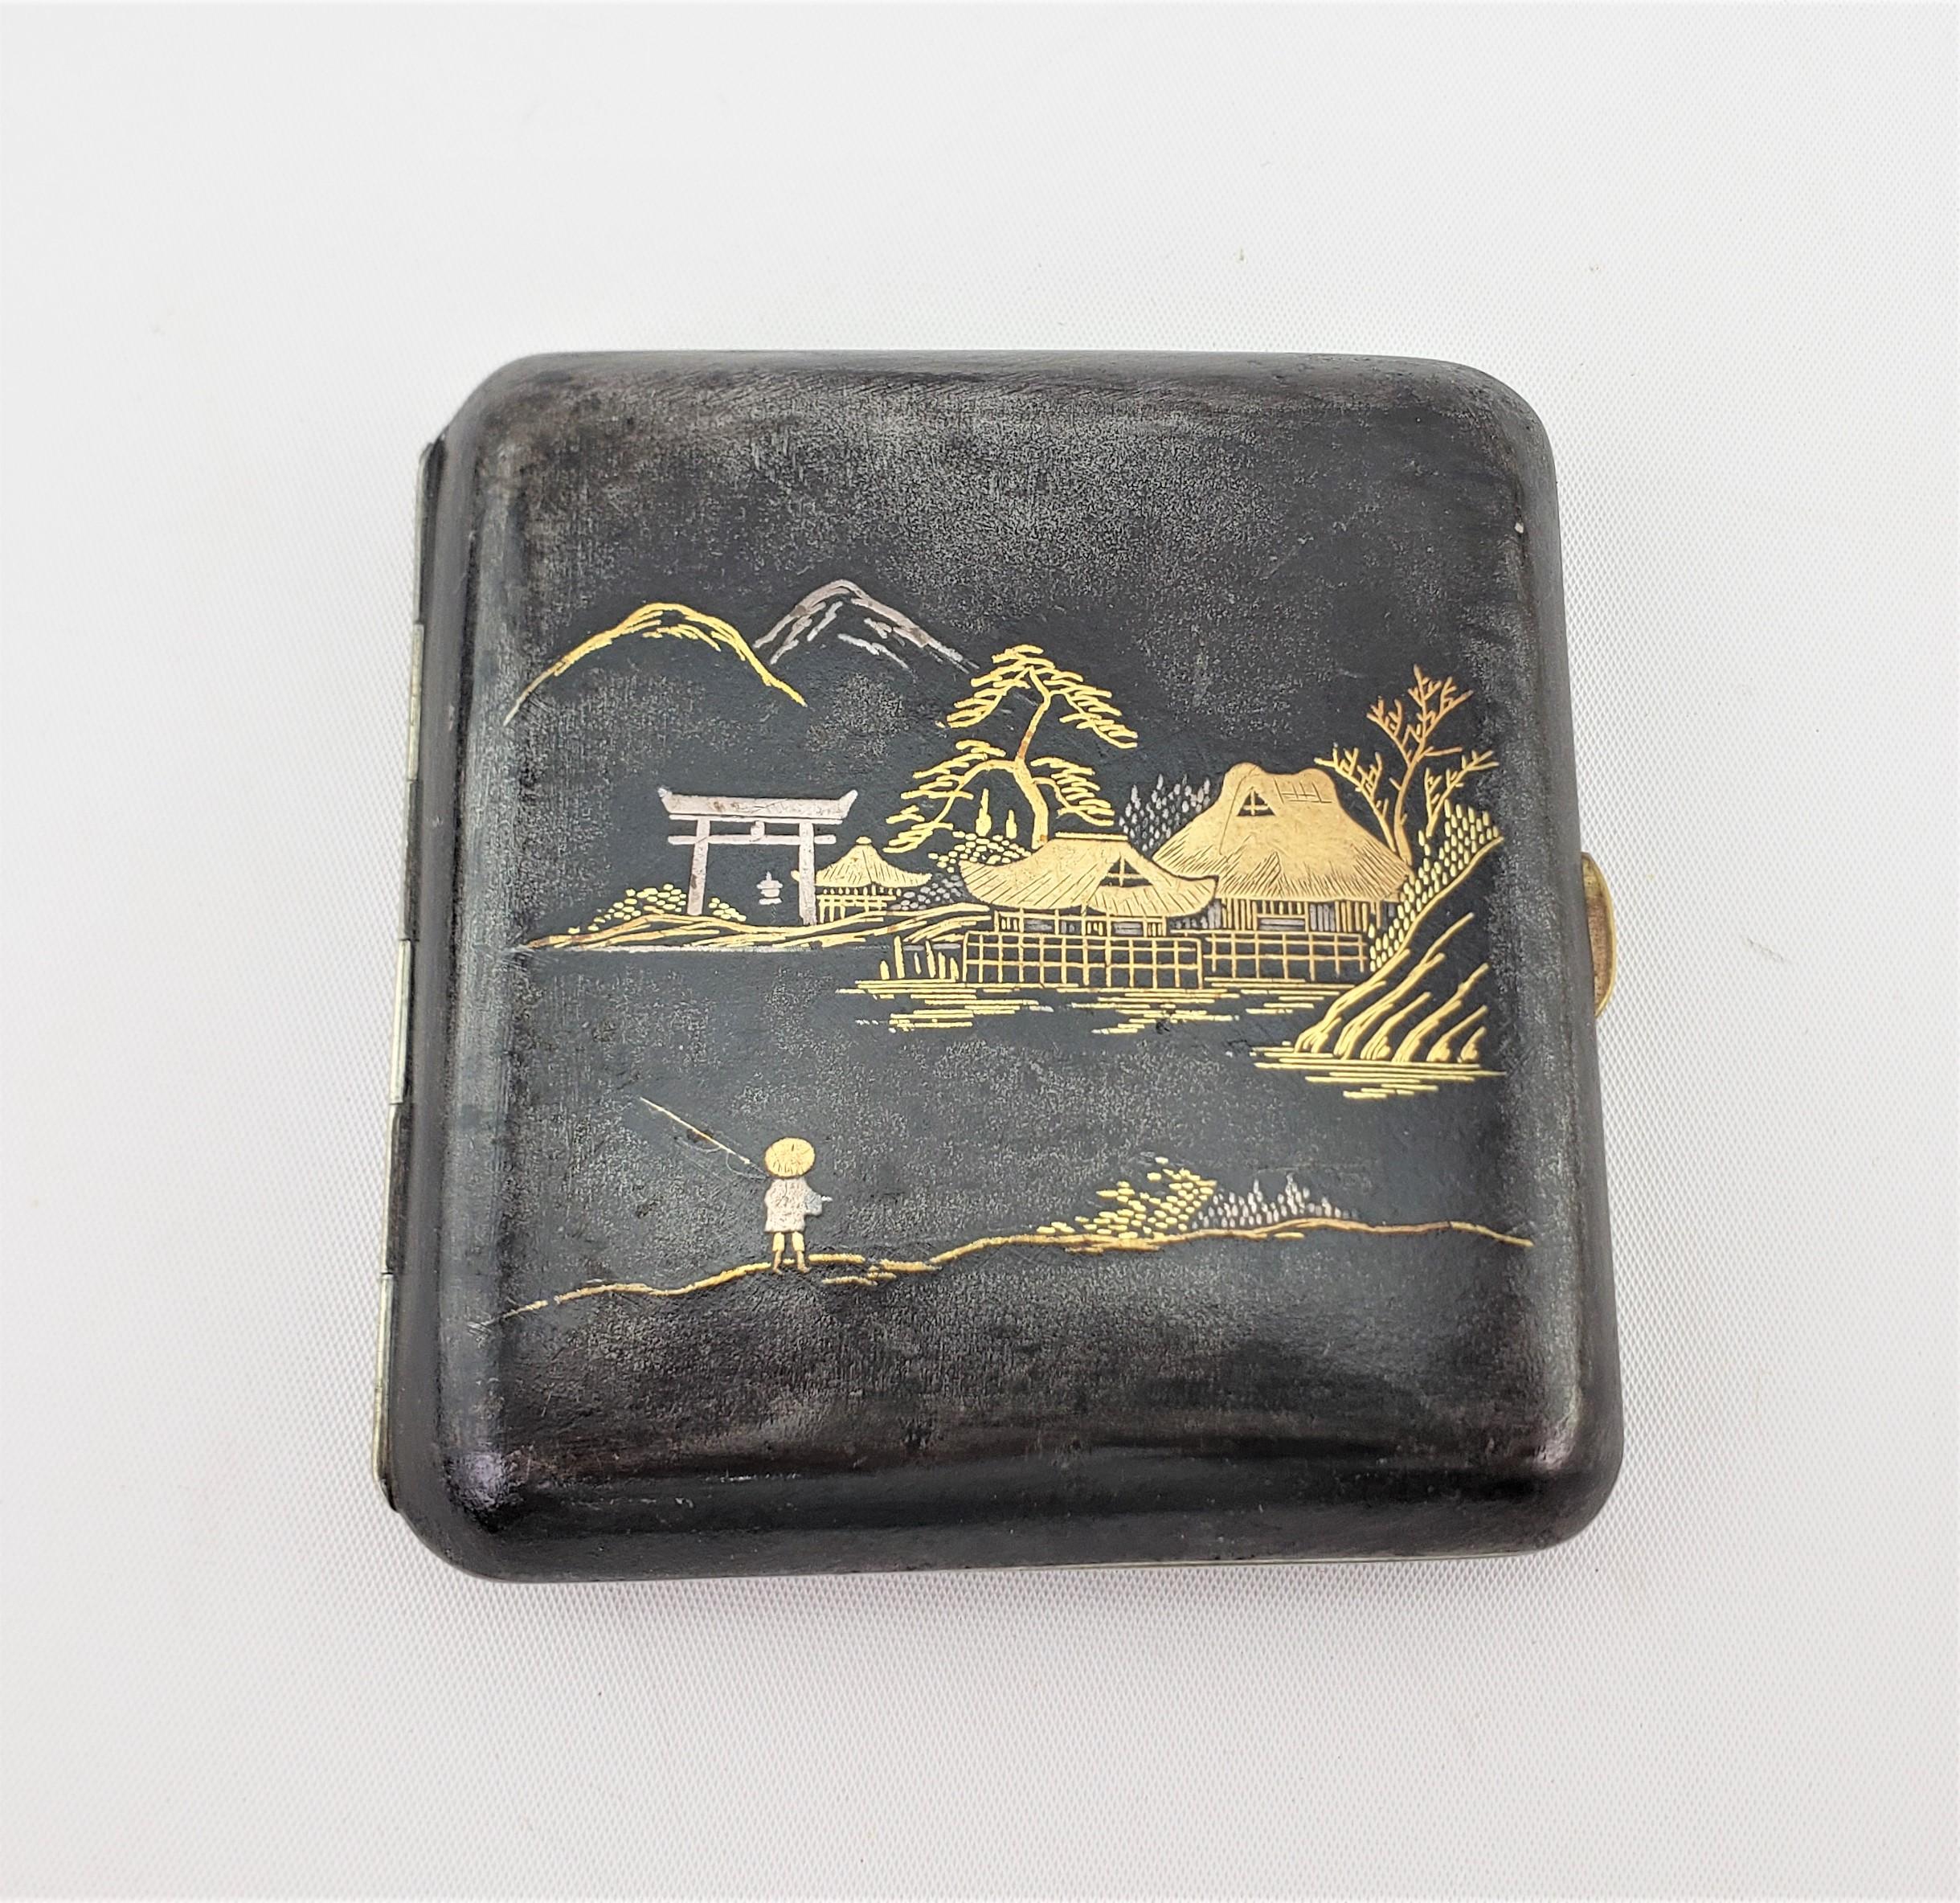 This antique Japanese cigarette case is signed by an unknown artist, and dates to approximately 1920 and done in an Anglo-Japanese style. This damascene styled cigarette case is done with oxidized metal and decorated with a well executed Japanese